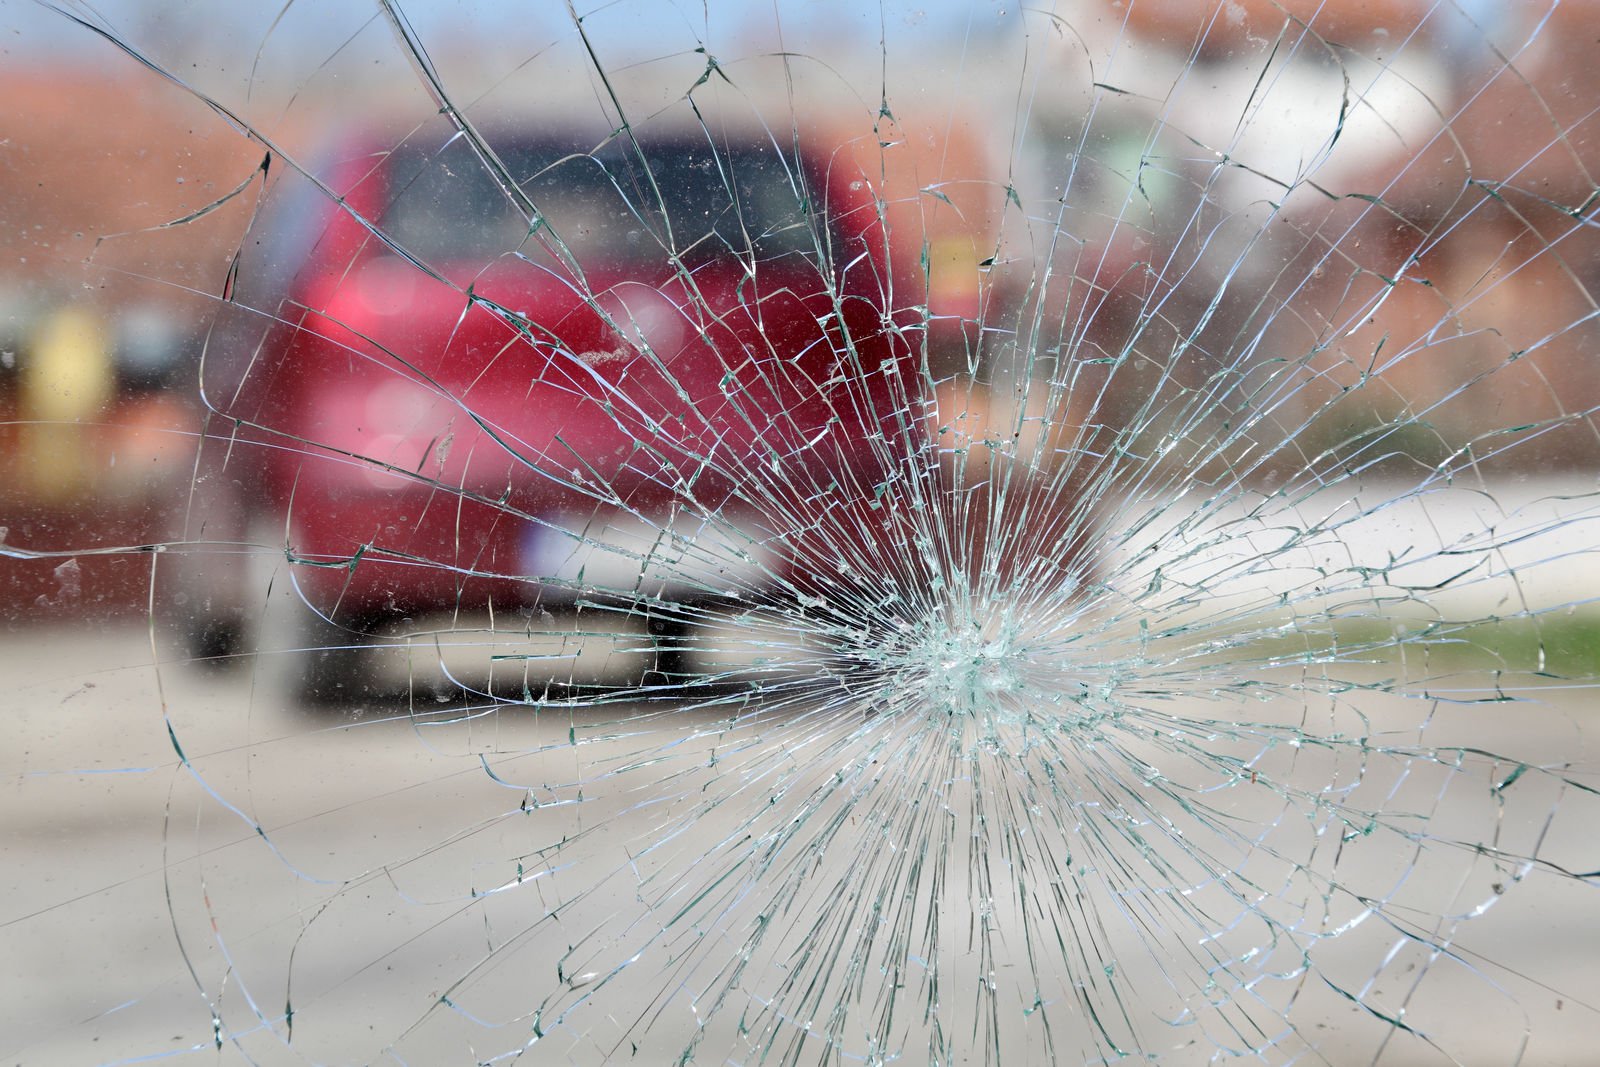 Are broken car windows covered by insurance?